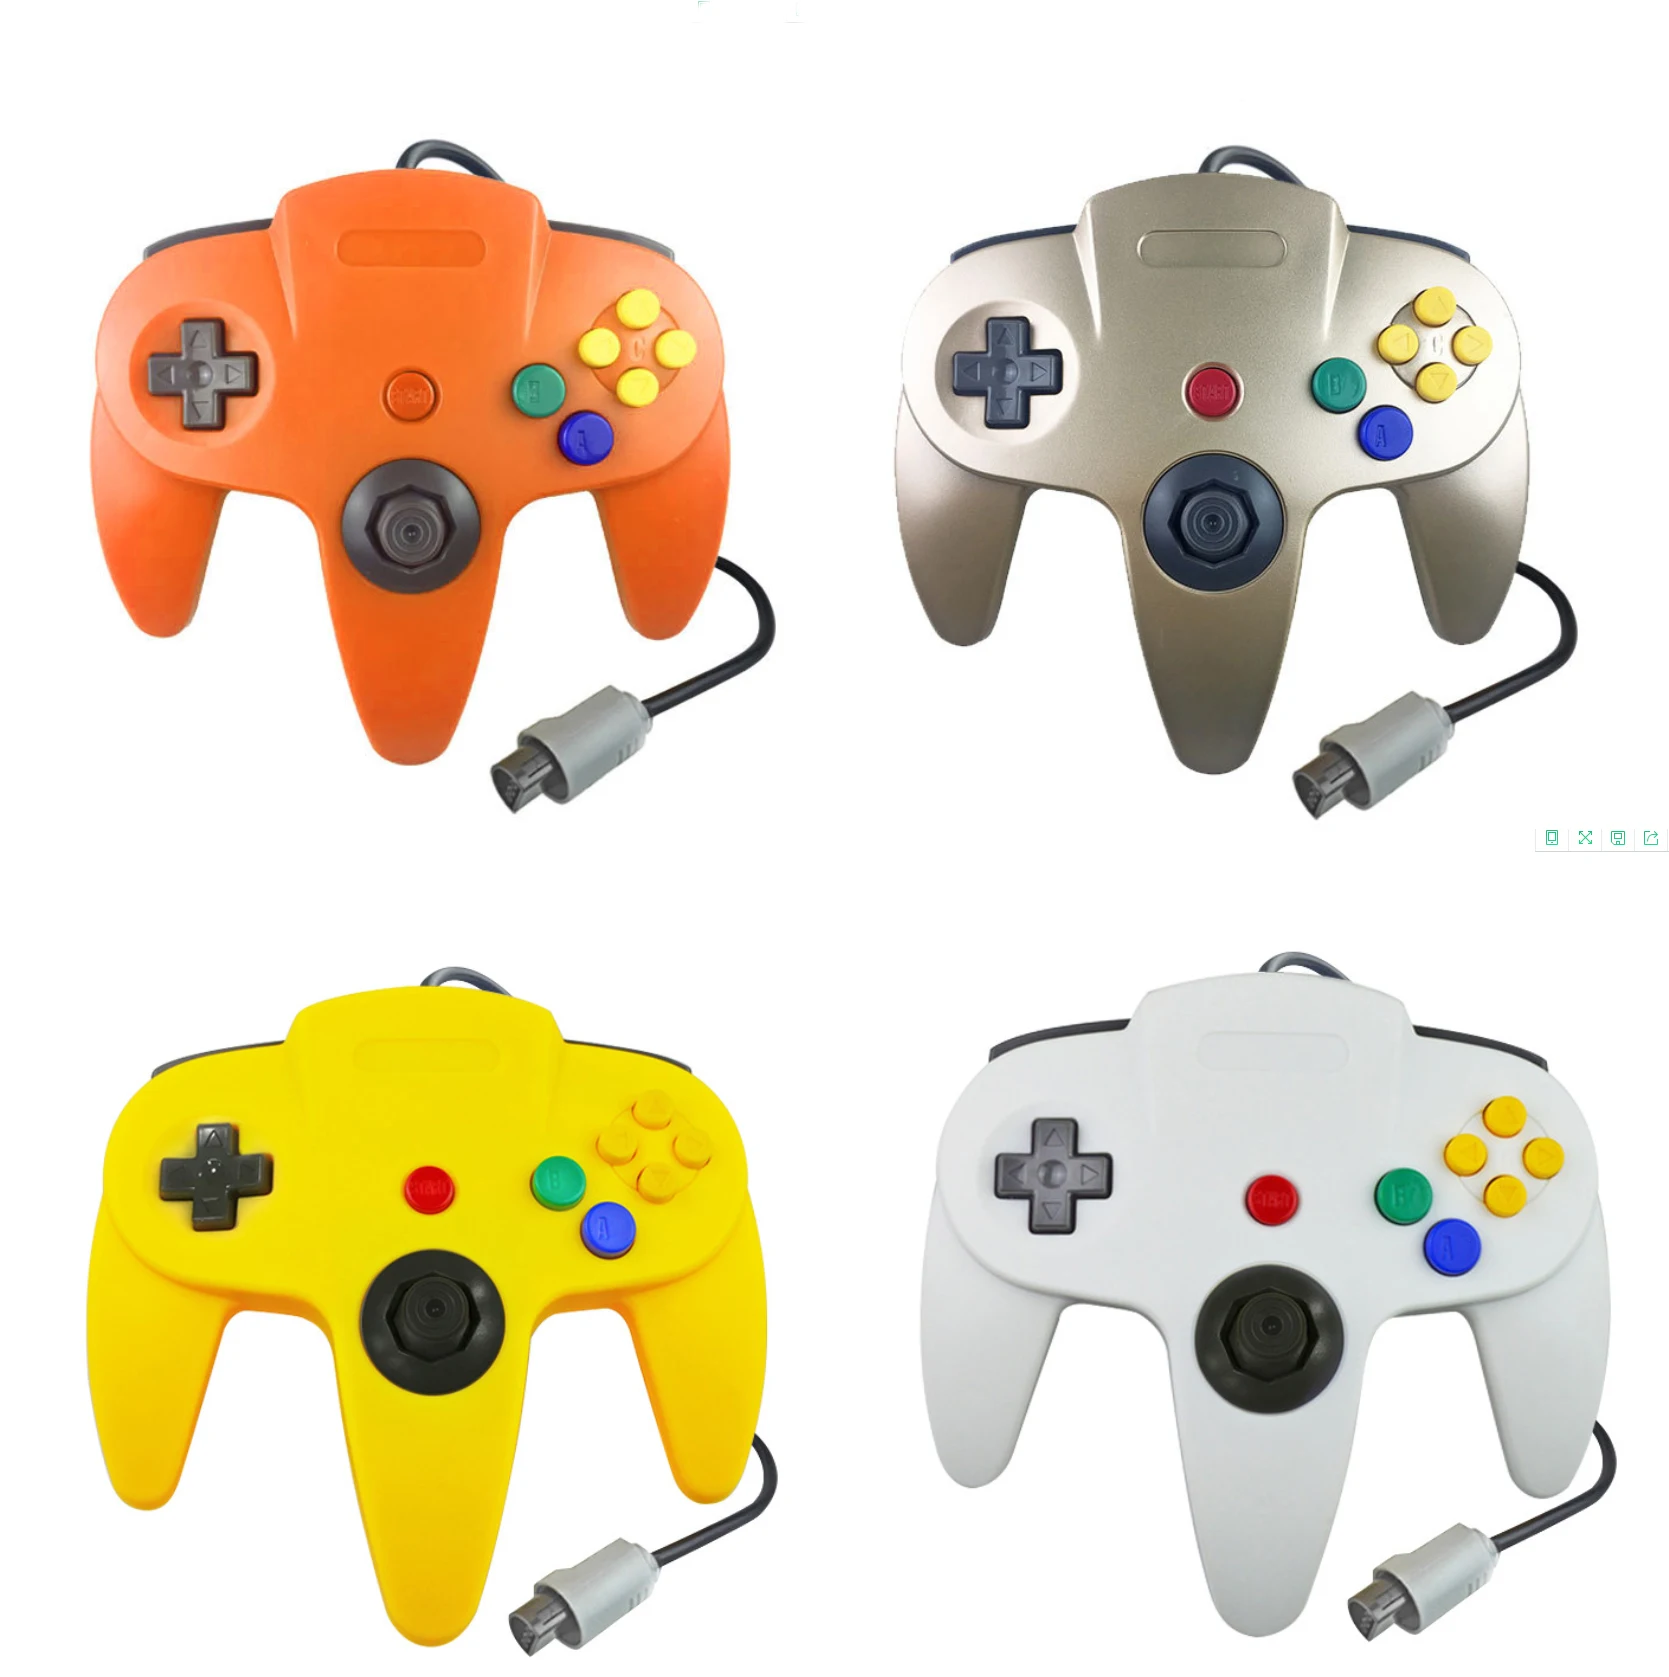 

free shipping Wired for N64 port Game Controller Gaming Joypad Joystick Gamepad For Nintendo Game cube 64 PC, Colorful